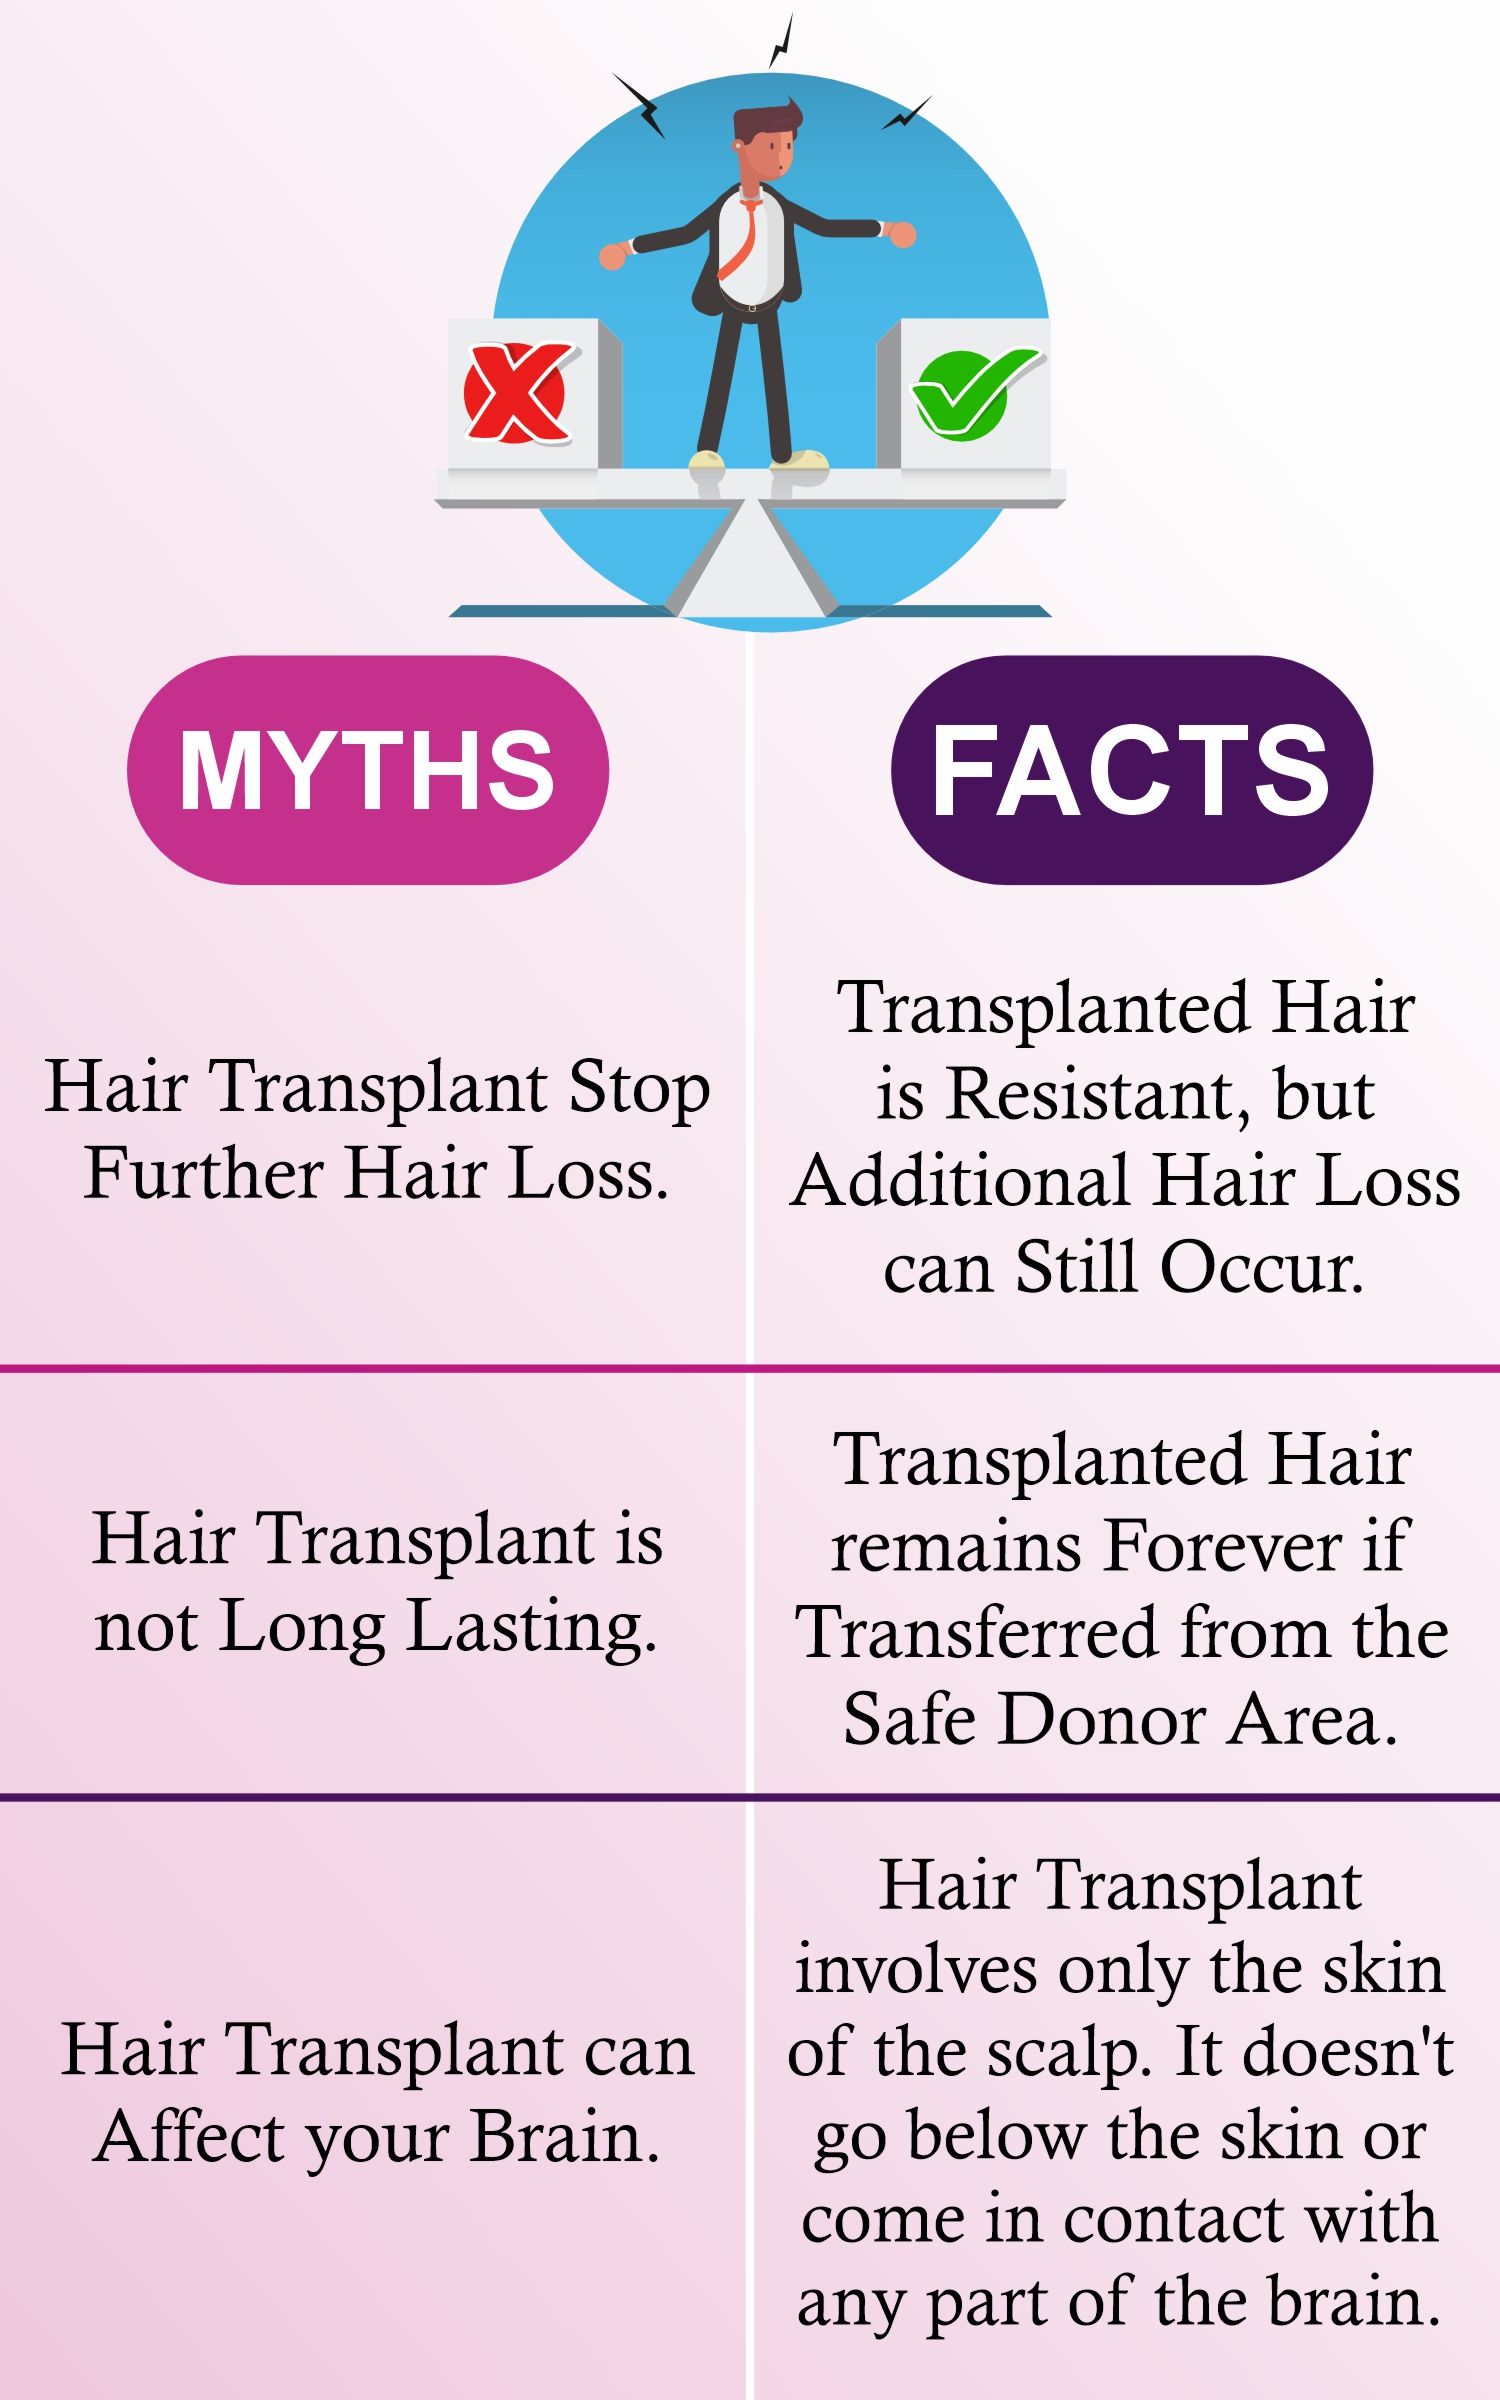 Hair Transplant Myths and Facts